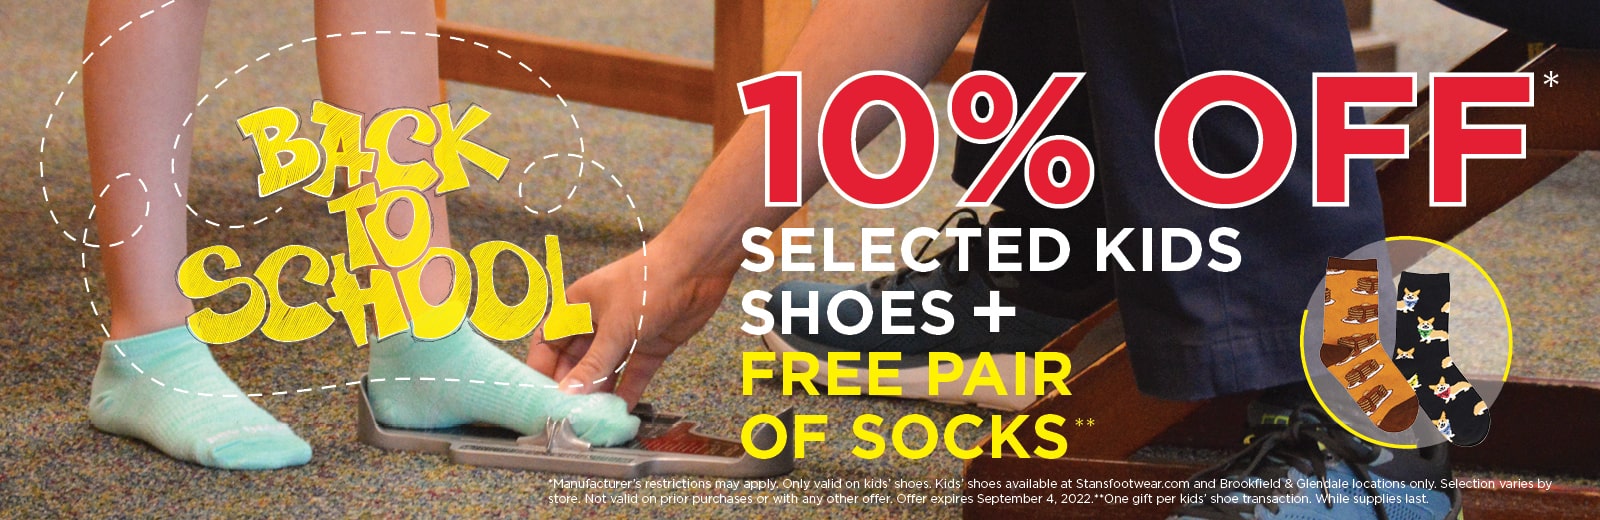 Save 10% on selected styles and get a free pair of socks with purchase